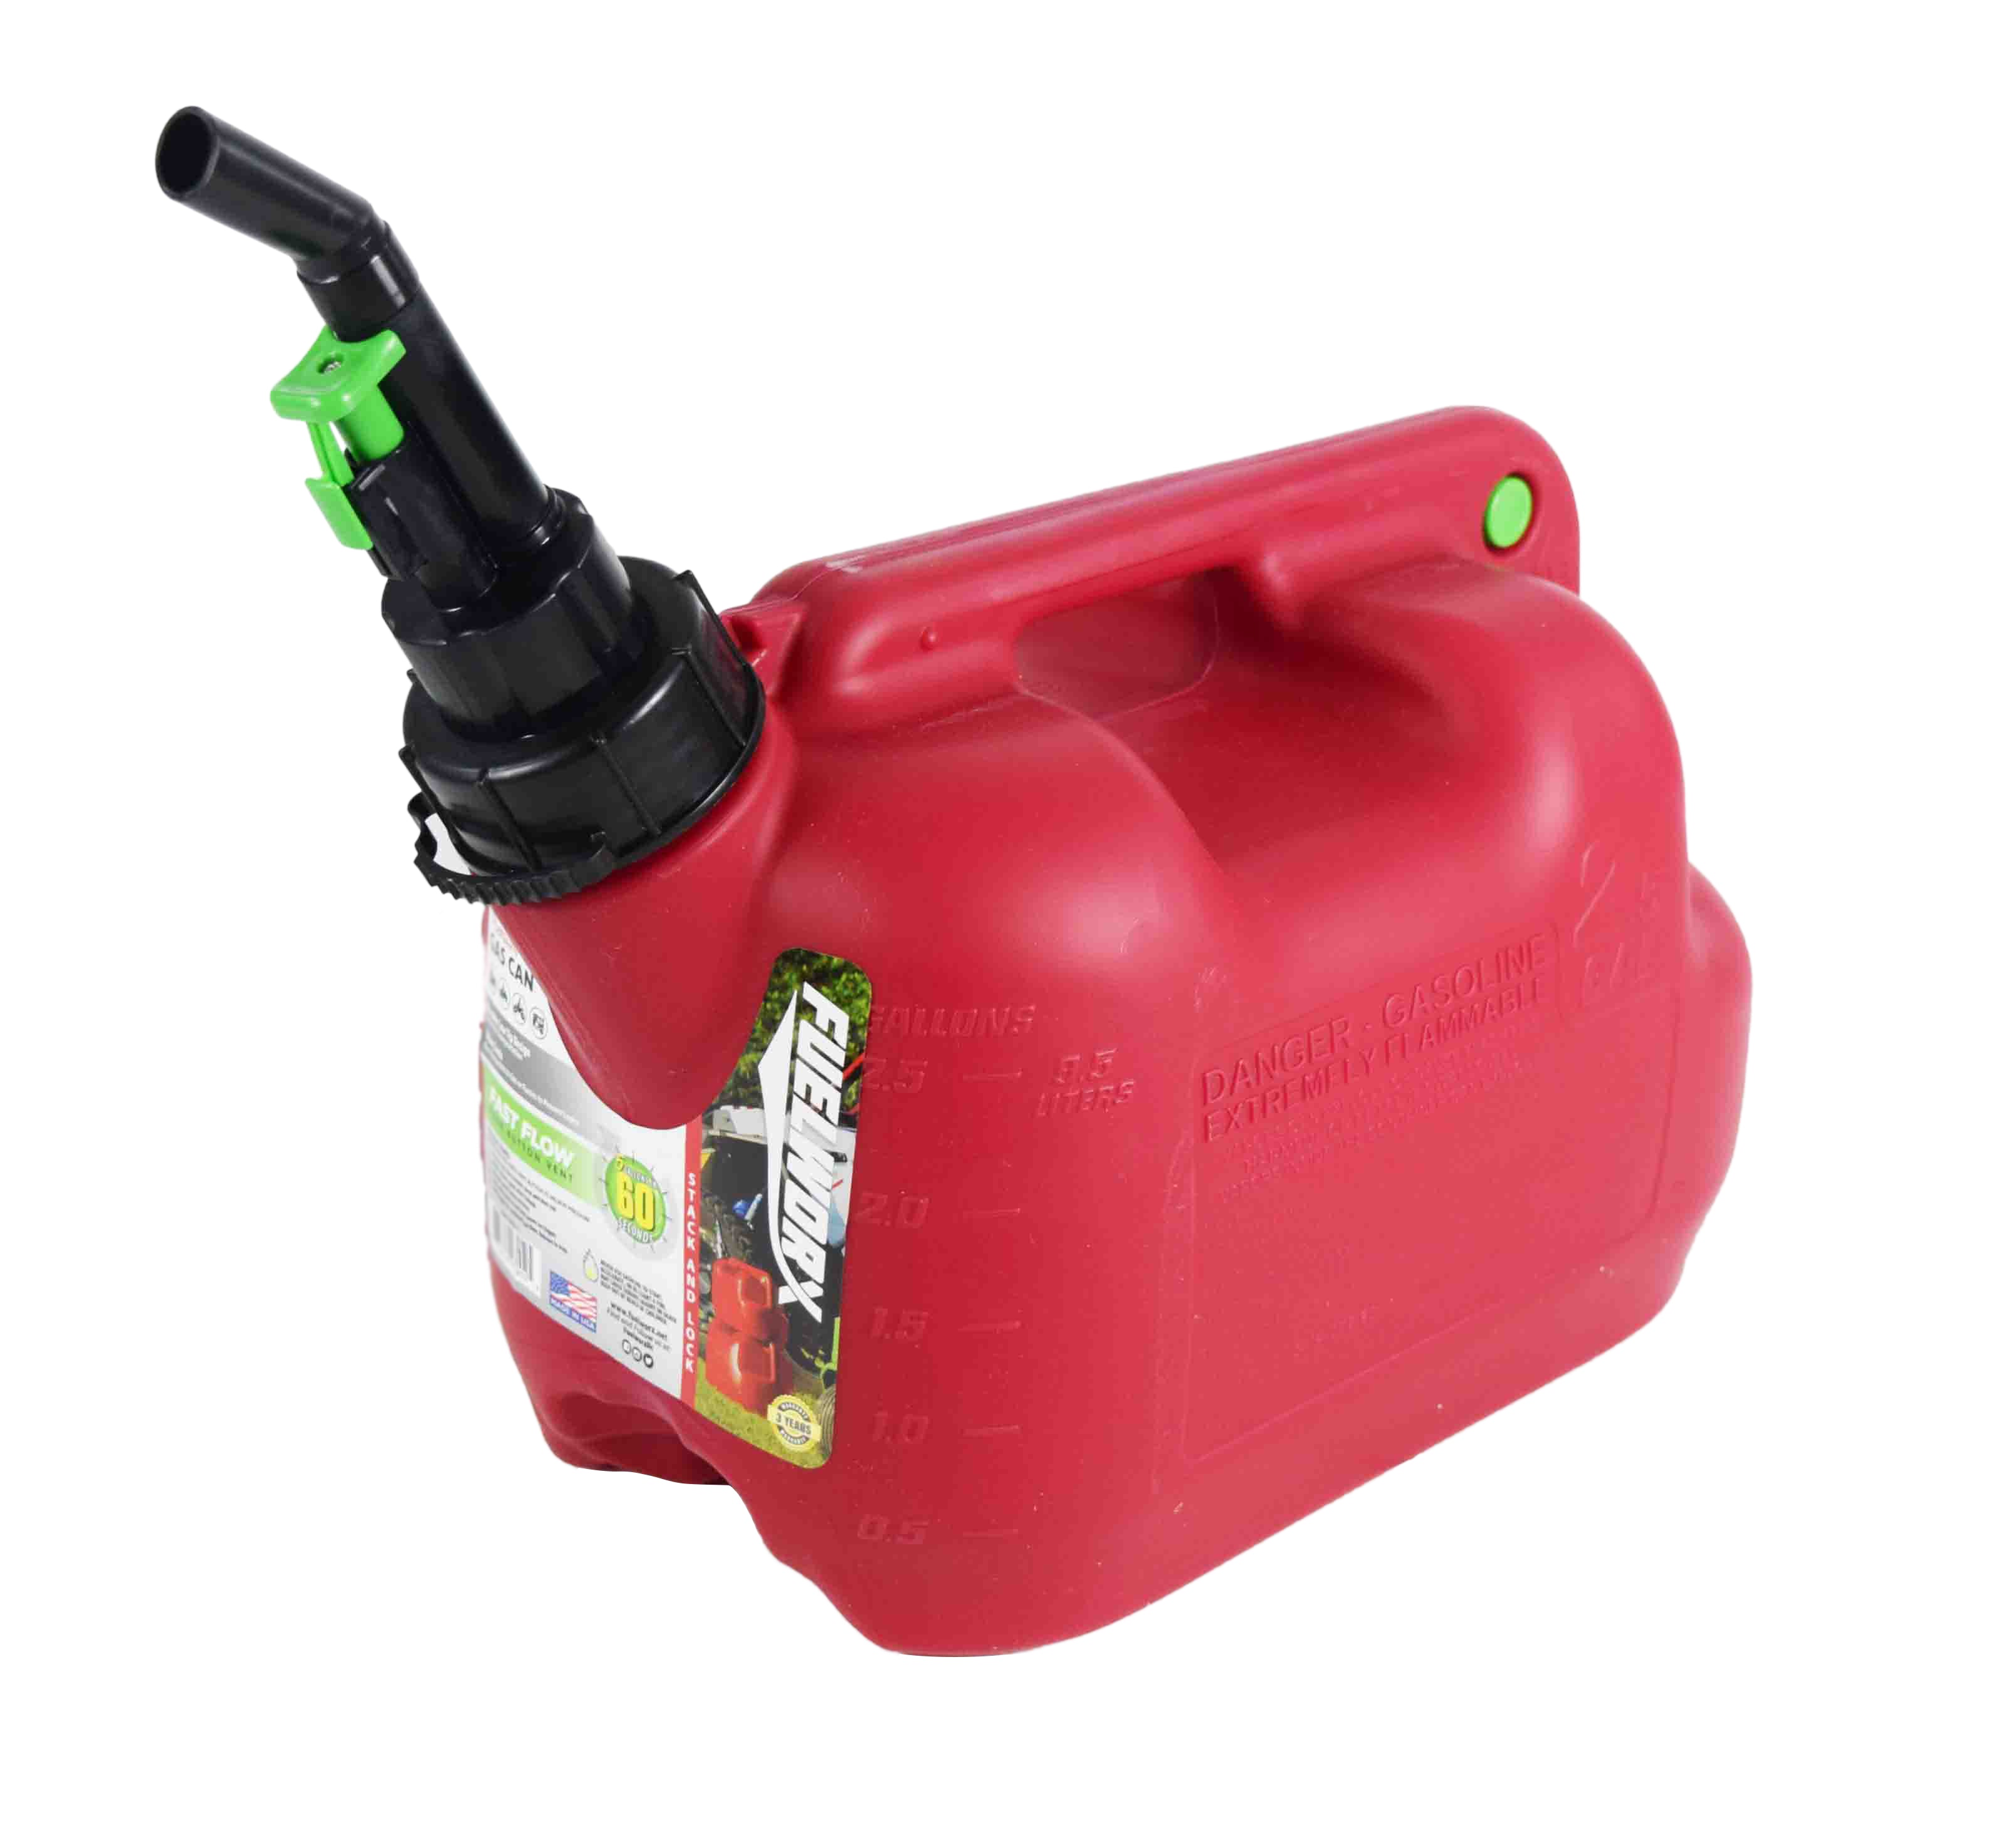 Fuelworx Red 2.5 Gallon Stackable Fast Pour Gas Fuel Cans CARB Compliant Made in The USA (2.5 Gallon Gas 2-Pack)